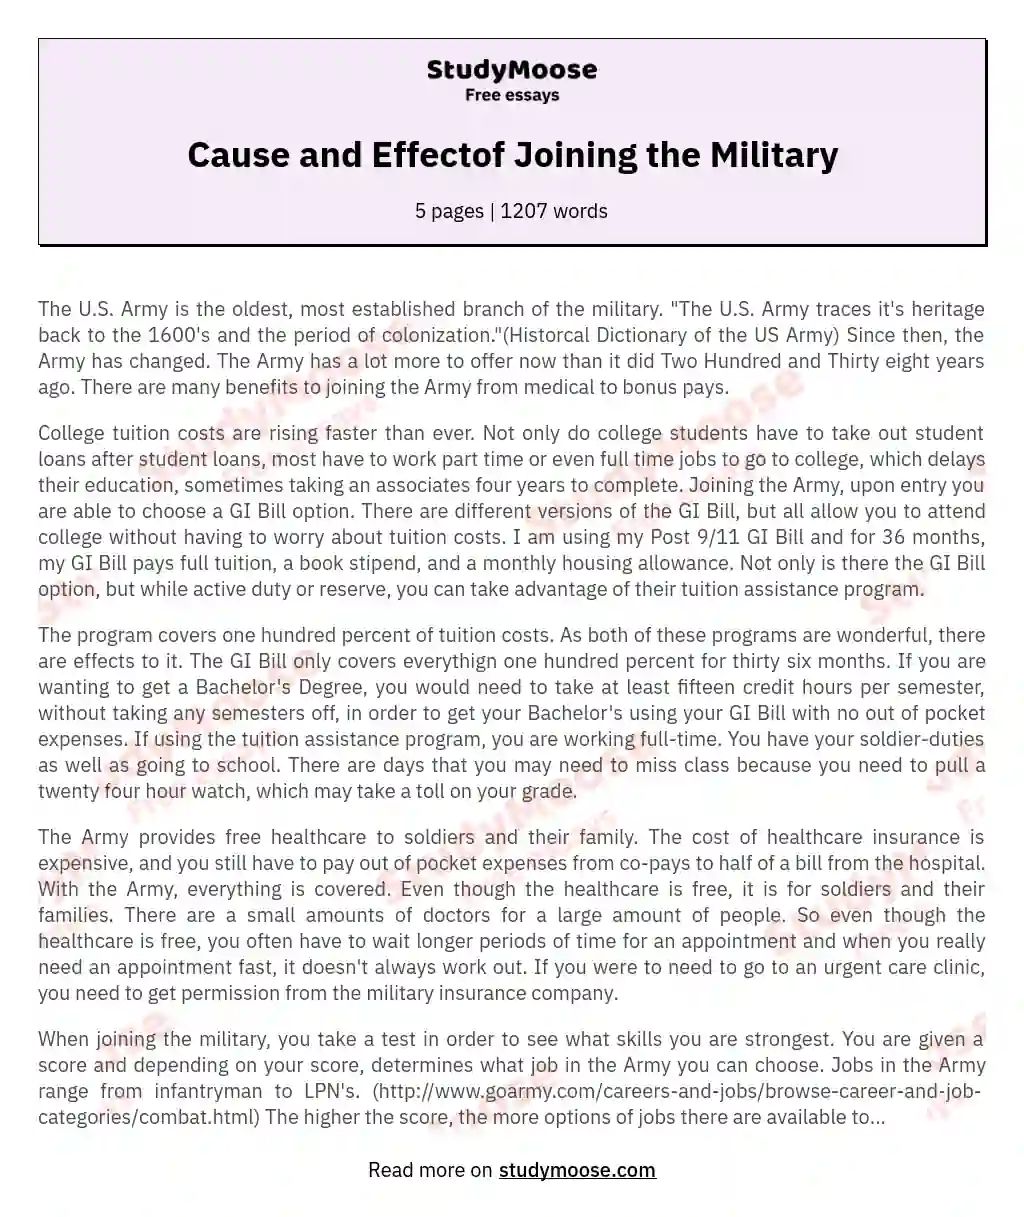 Cause and Effectof Joining the Military essay